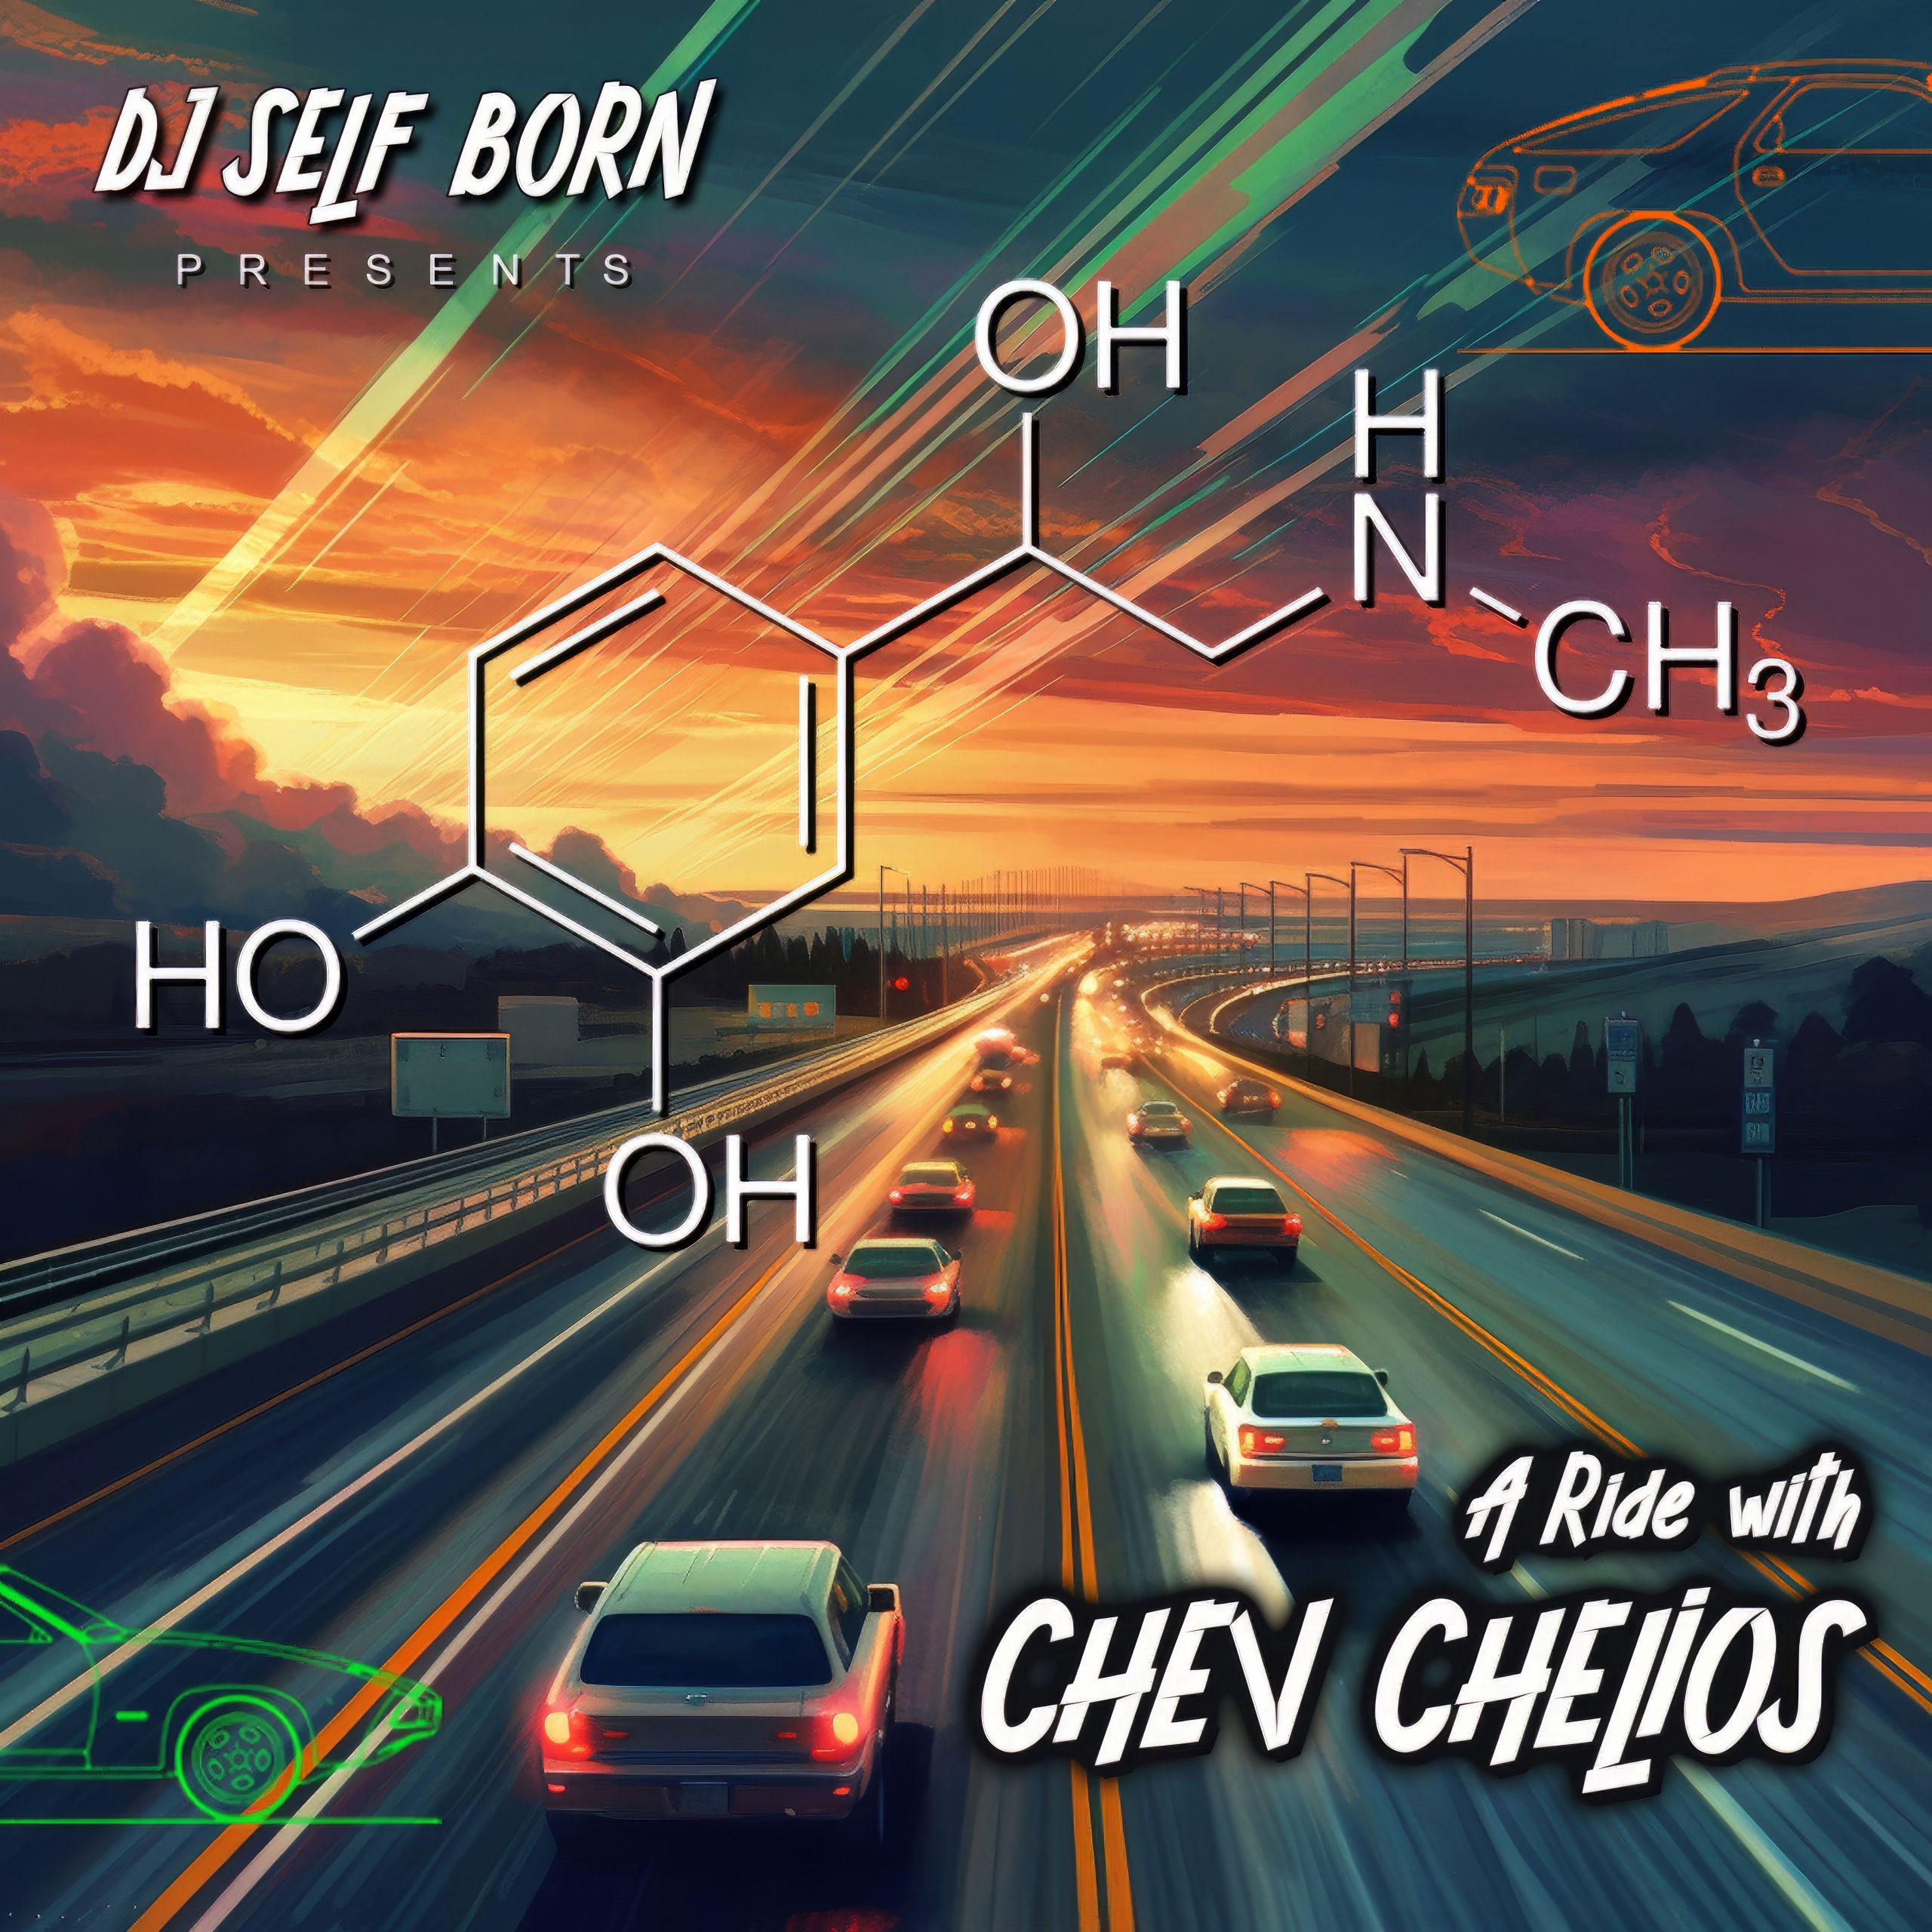 Musical Ecstasy and Cinematic Energy: Kanye West Collaborator DJ Self Born’s Fusion on new release “A Ride With Chev Chelios”.